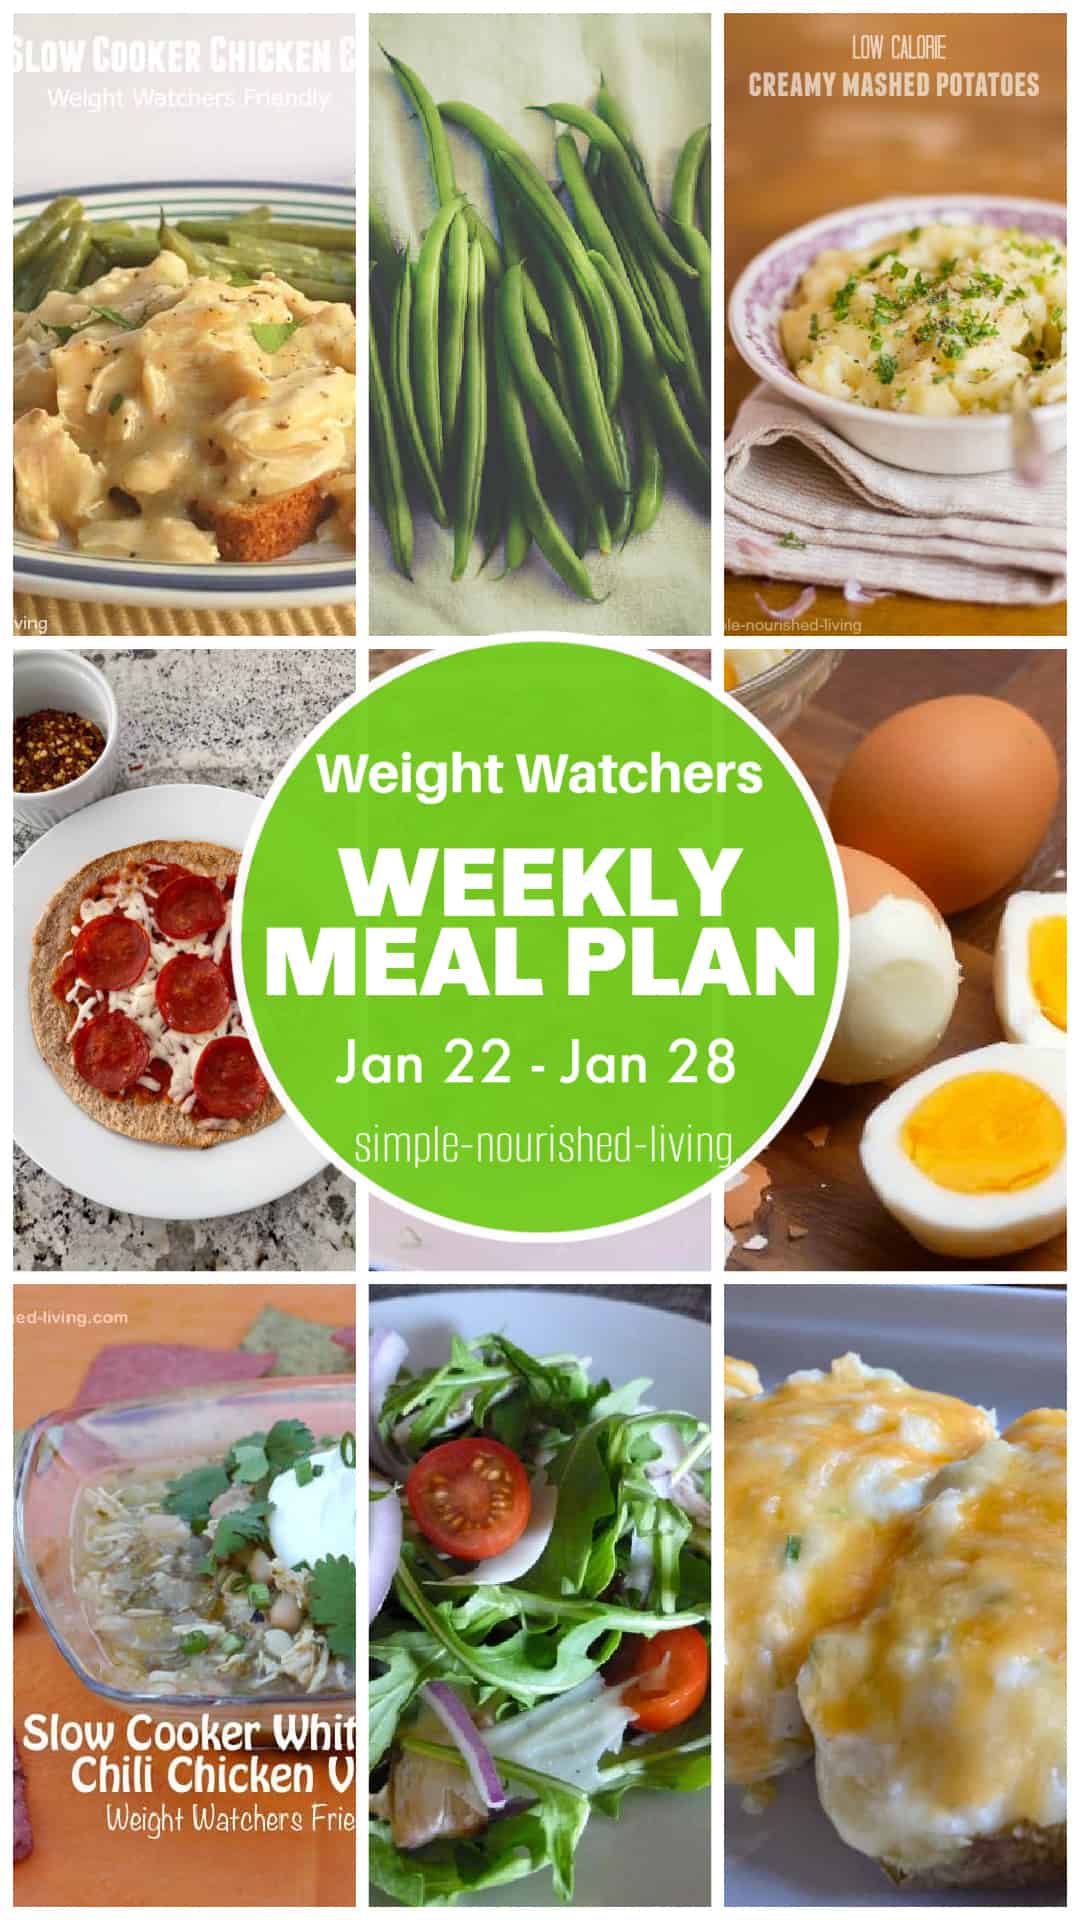 WW Weekly Meal Plan Food Photo Collage PIN